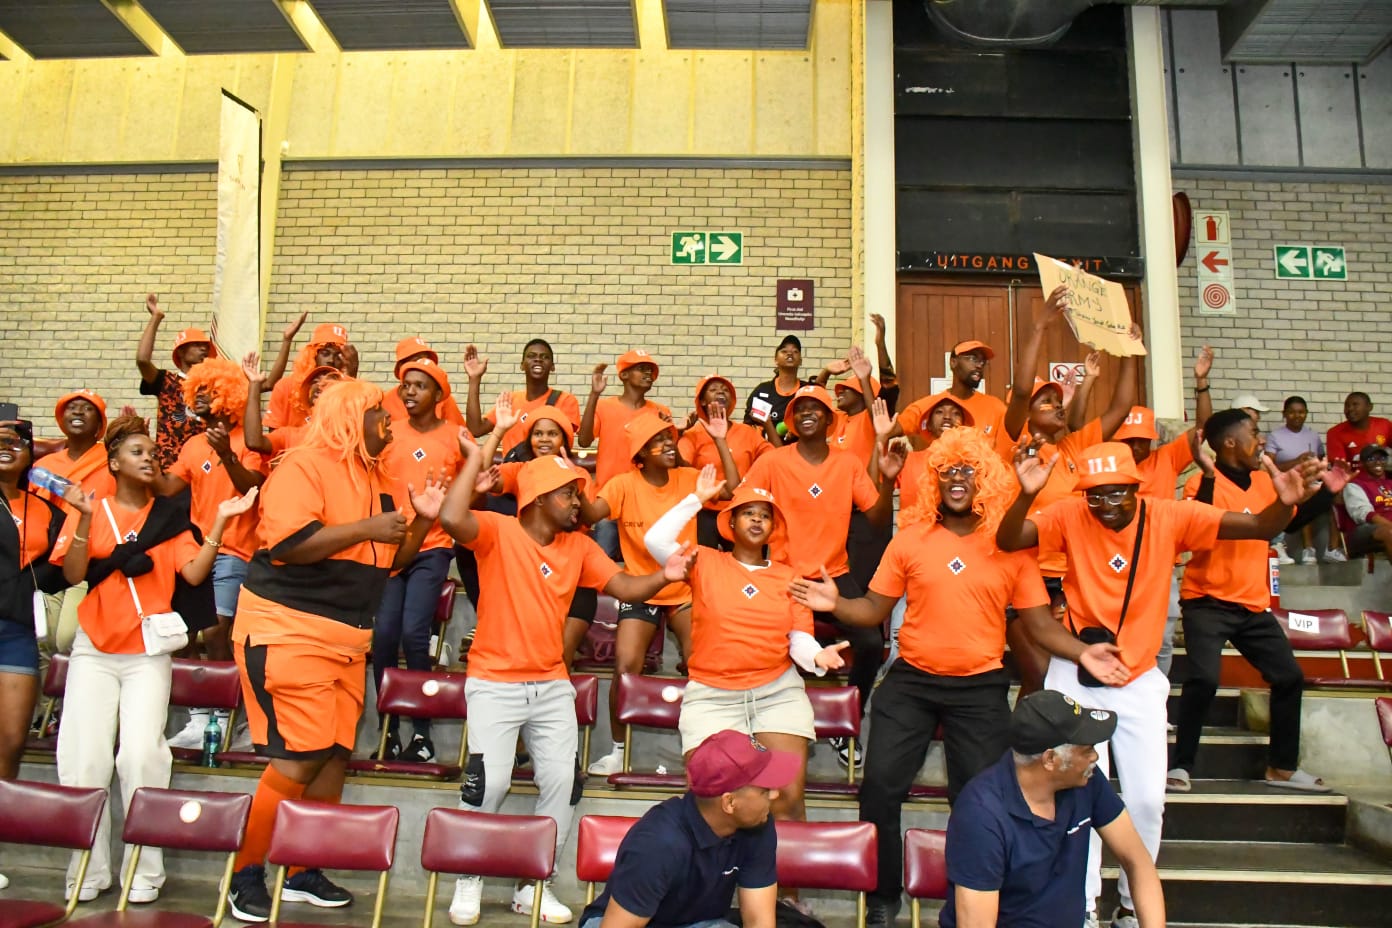 UJ supporters travelled to Stellenbosch to provide morale support for the UJ netball team.